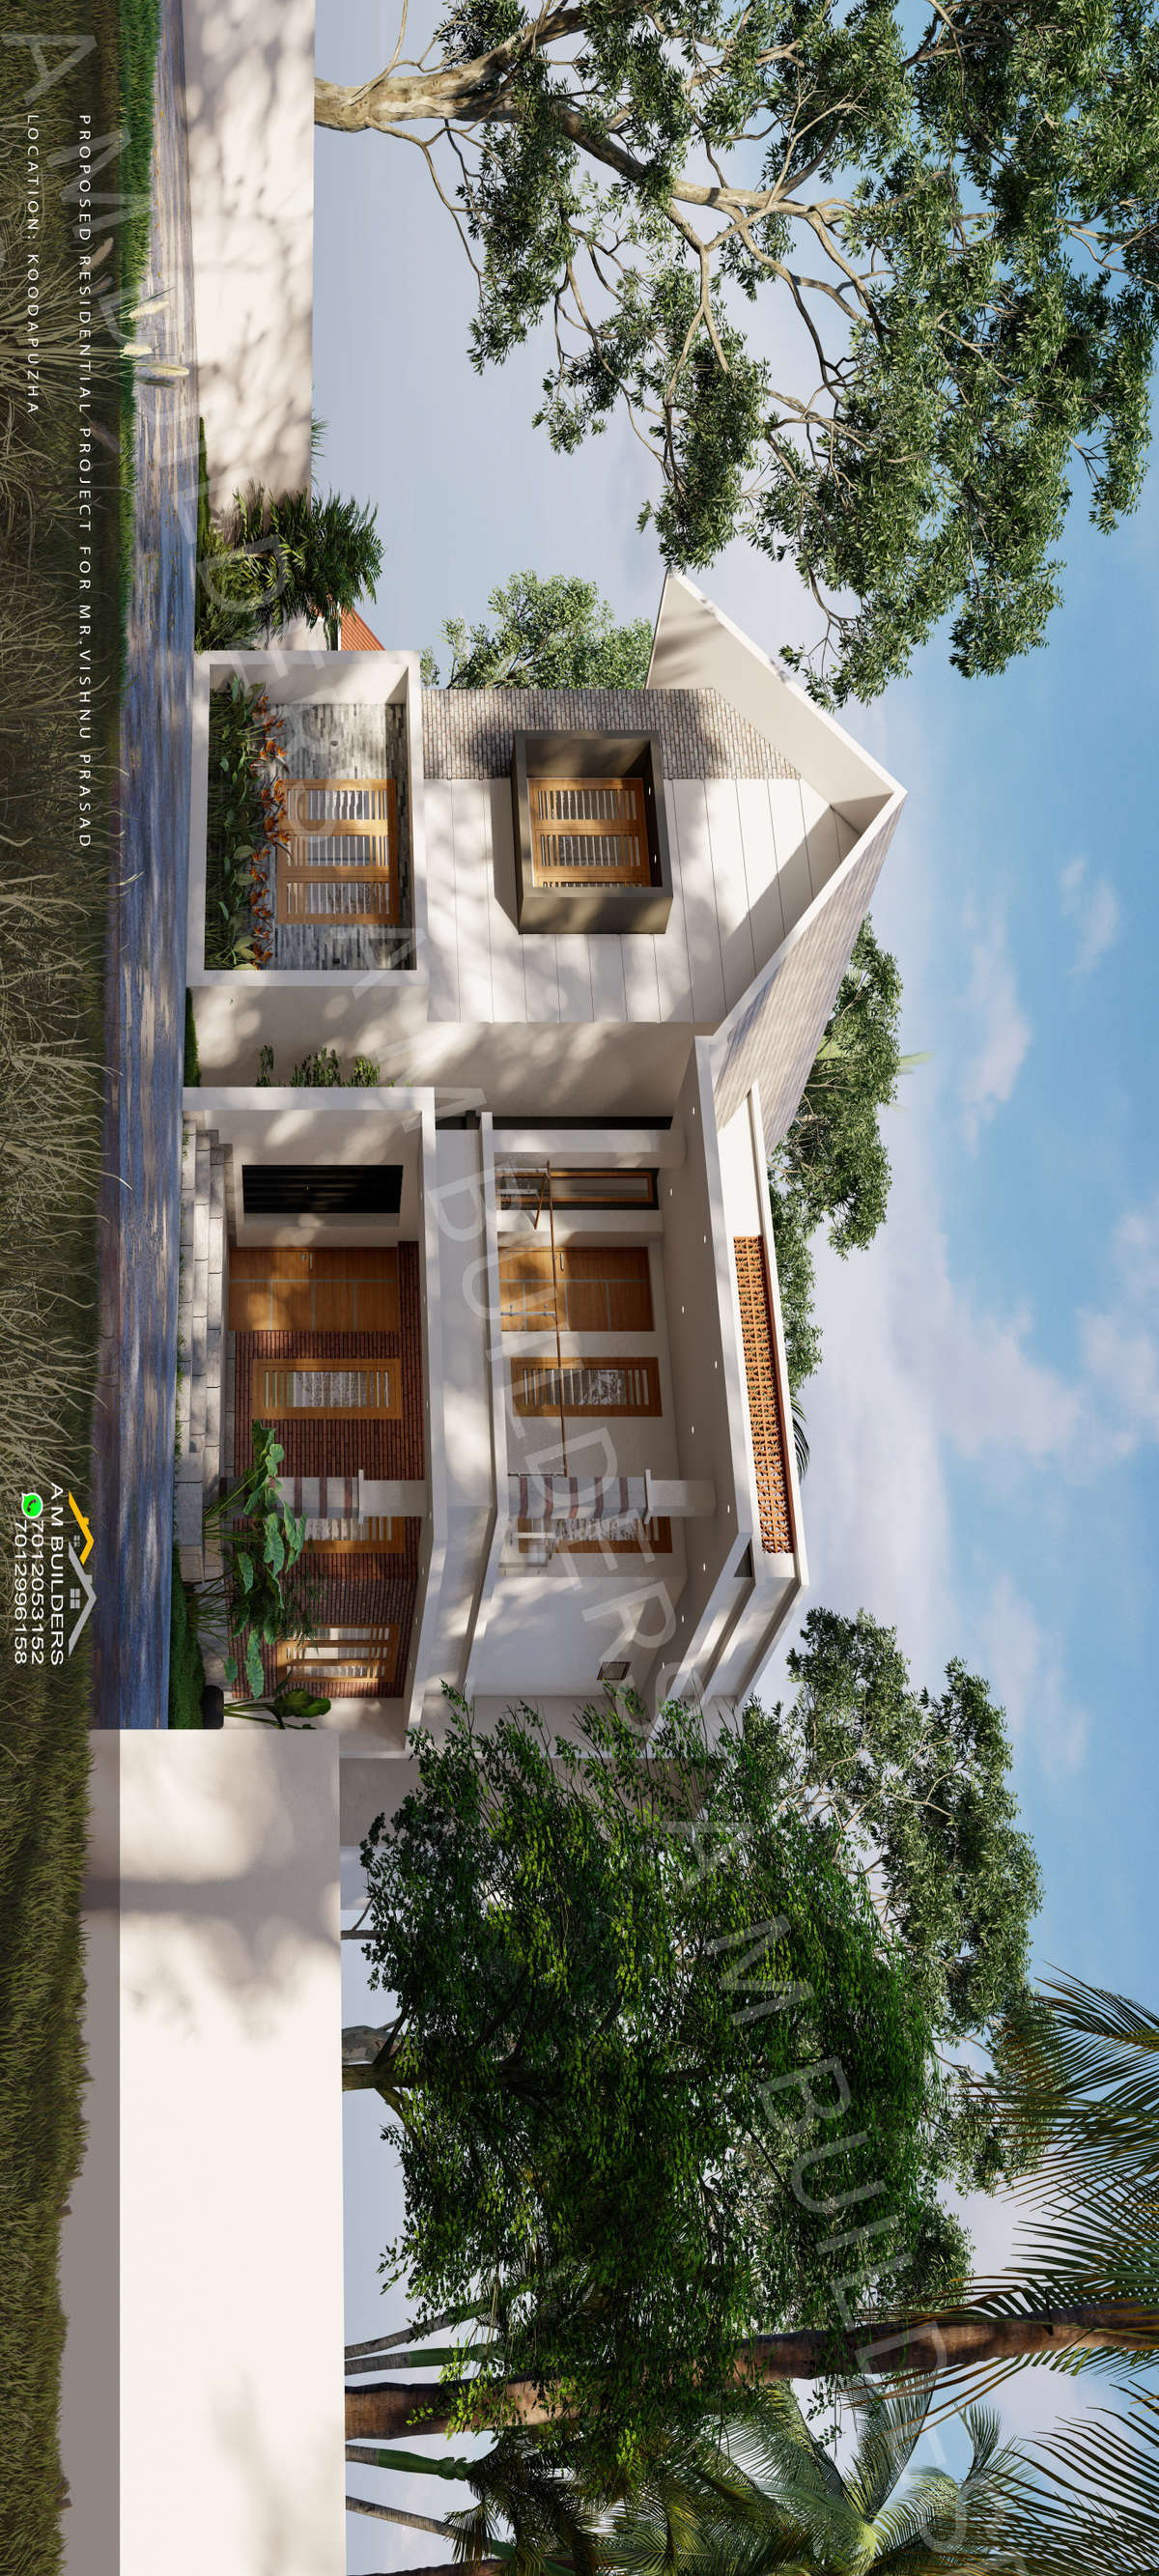 Designs by Civil Engineer A M BUILDERS, Thrissur | Kolo